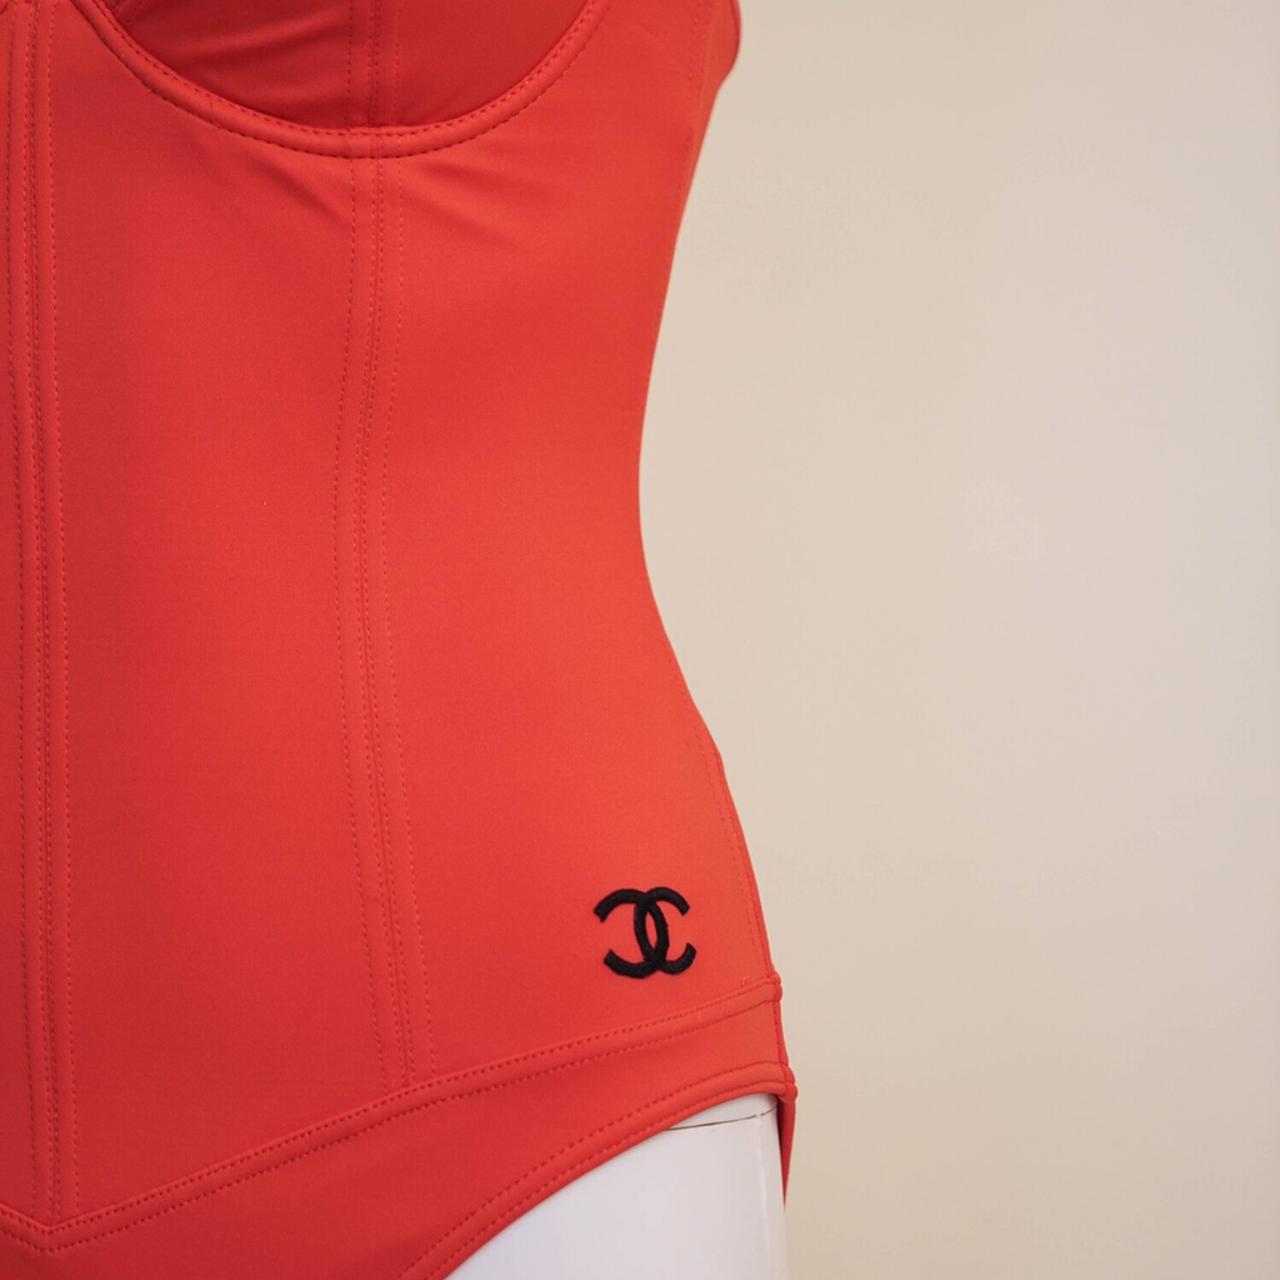 Vintage Chanel 1995 Red Swimsuits As Seen on Claudia Schiffer at